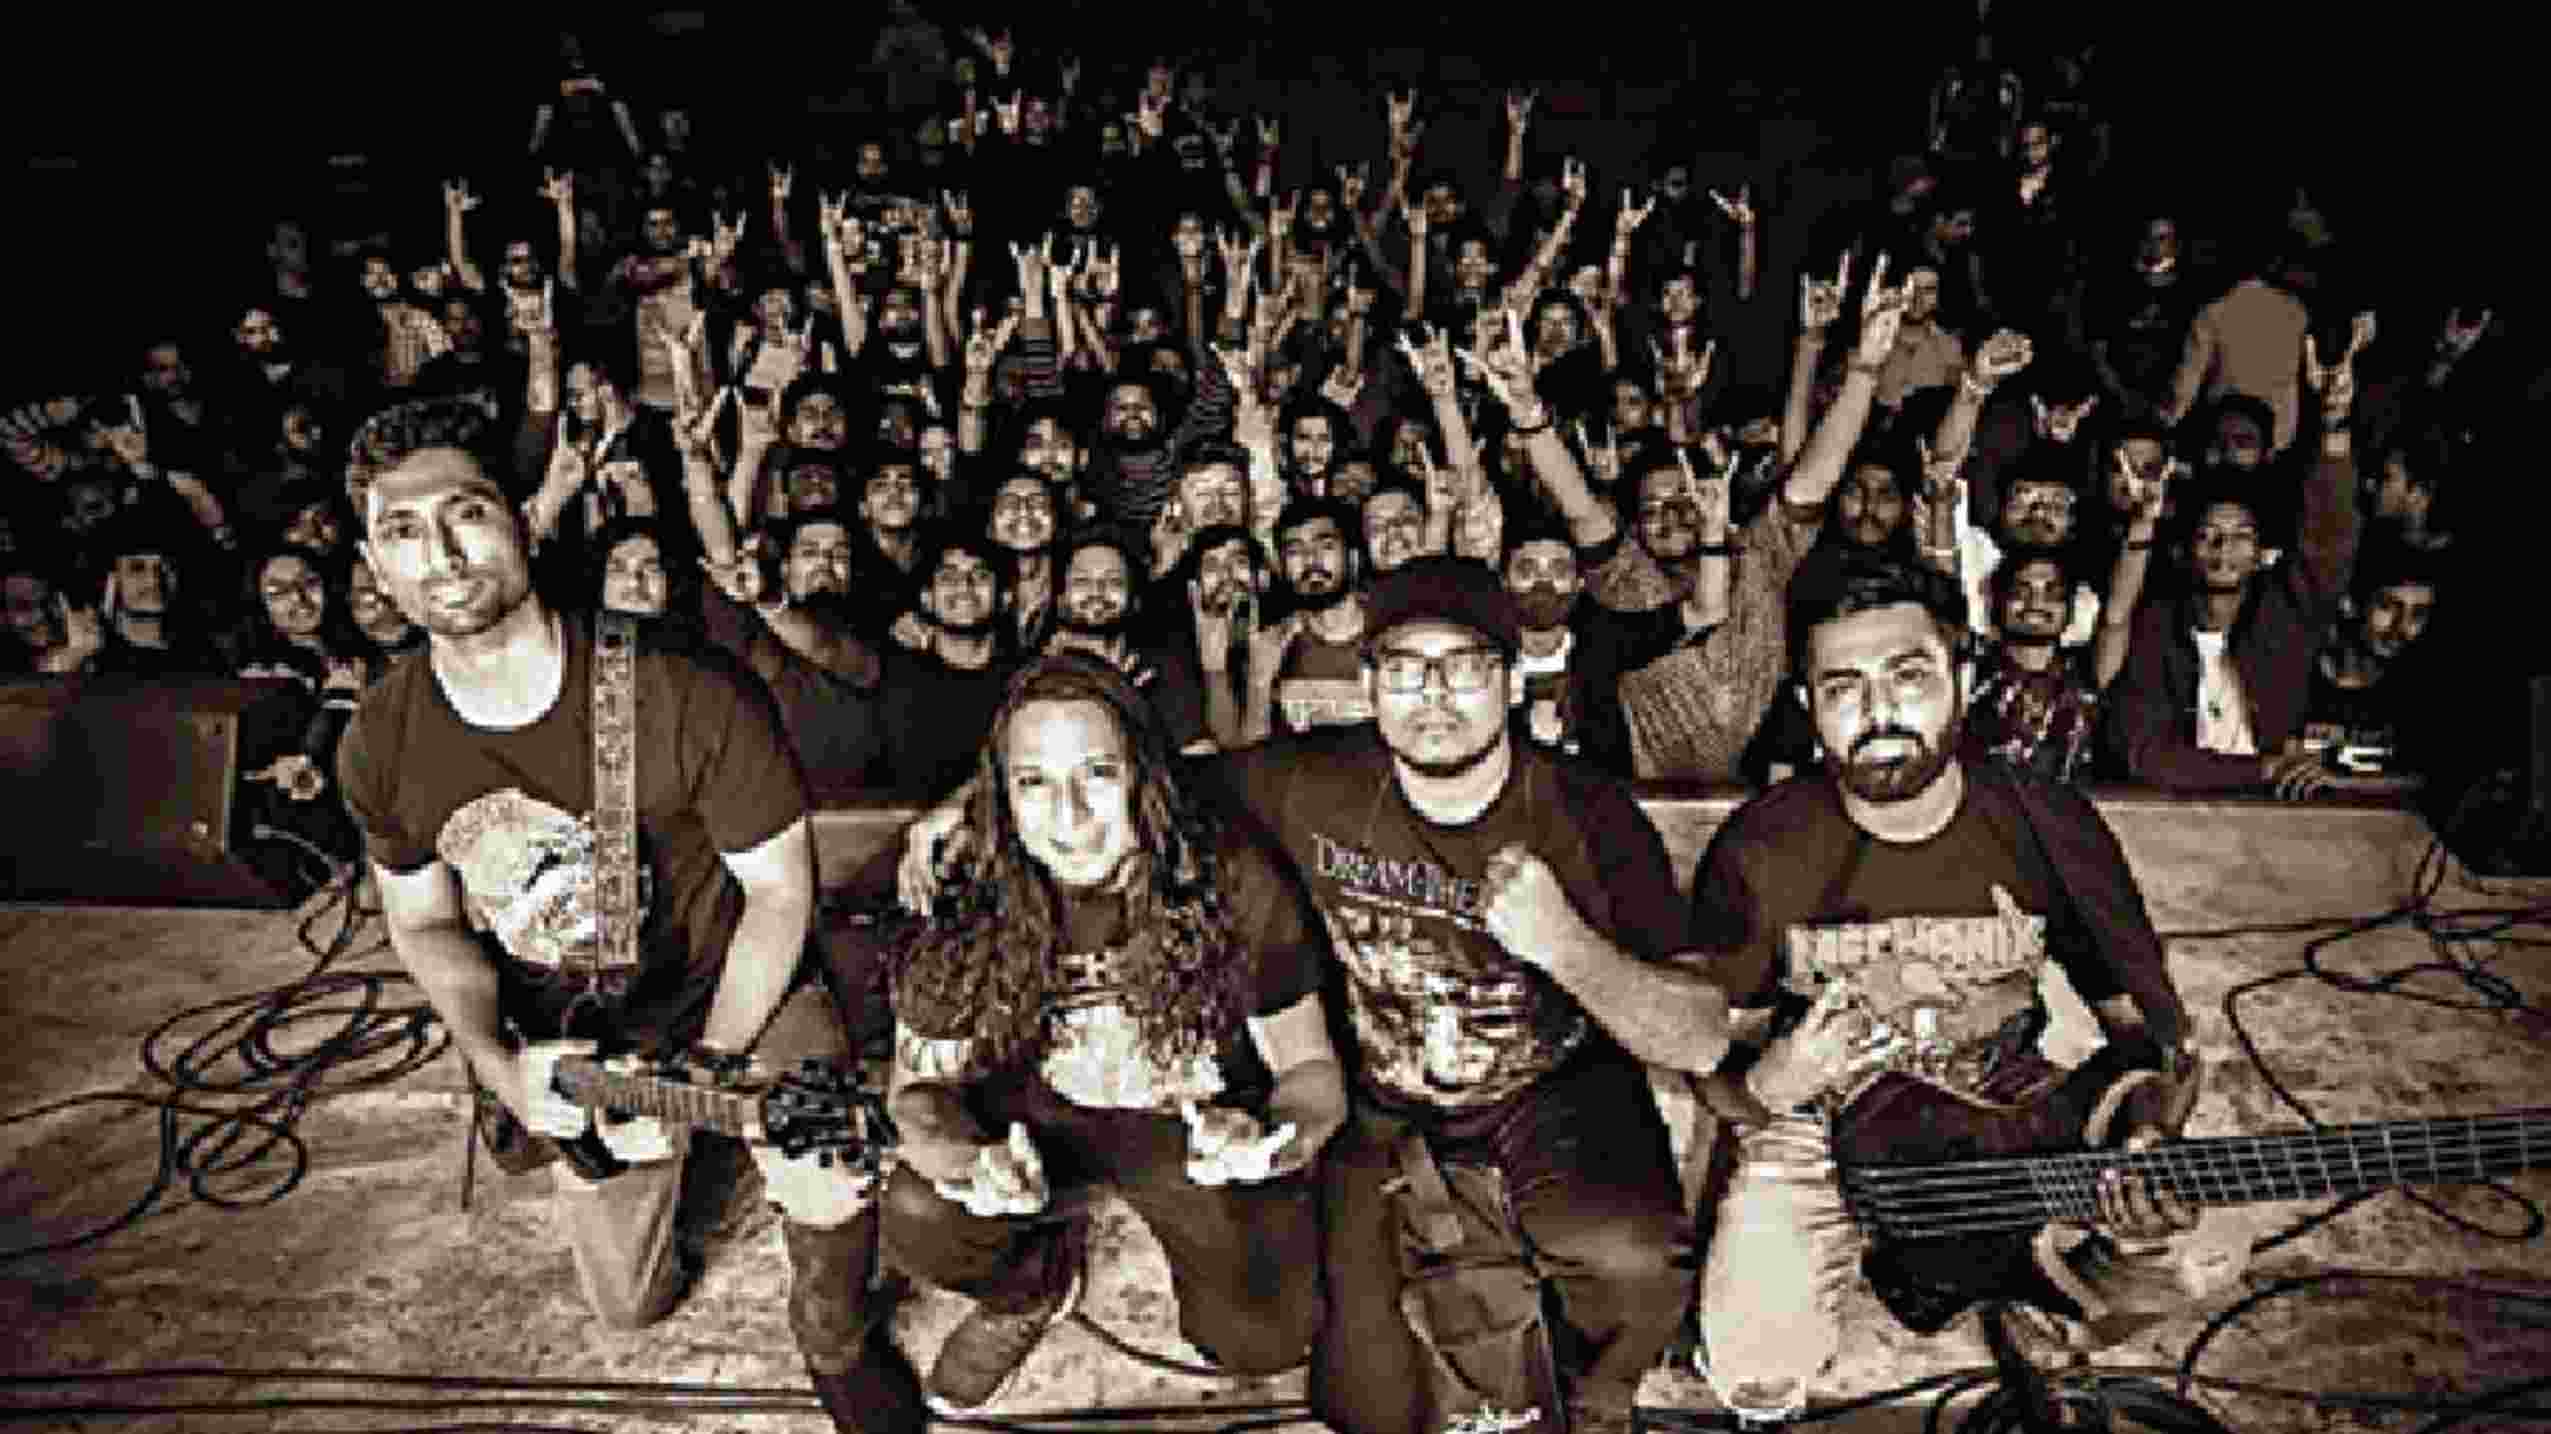 This was a comeback gig  for Mechanix from Bangladesh. The heavy metal band had formed in 2006 and was touring Kolkata for the first time